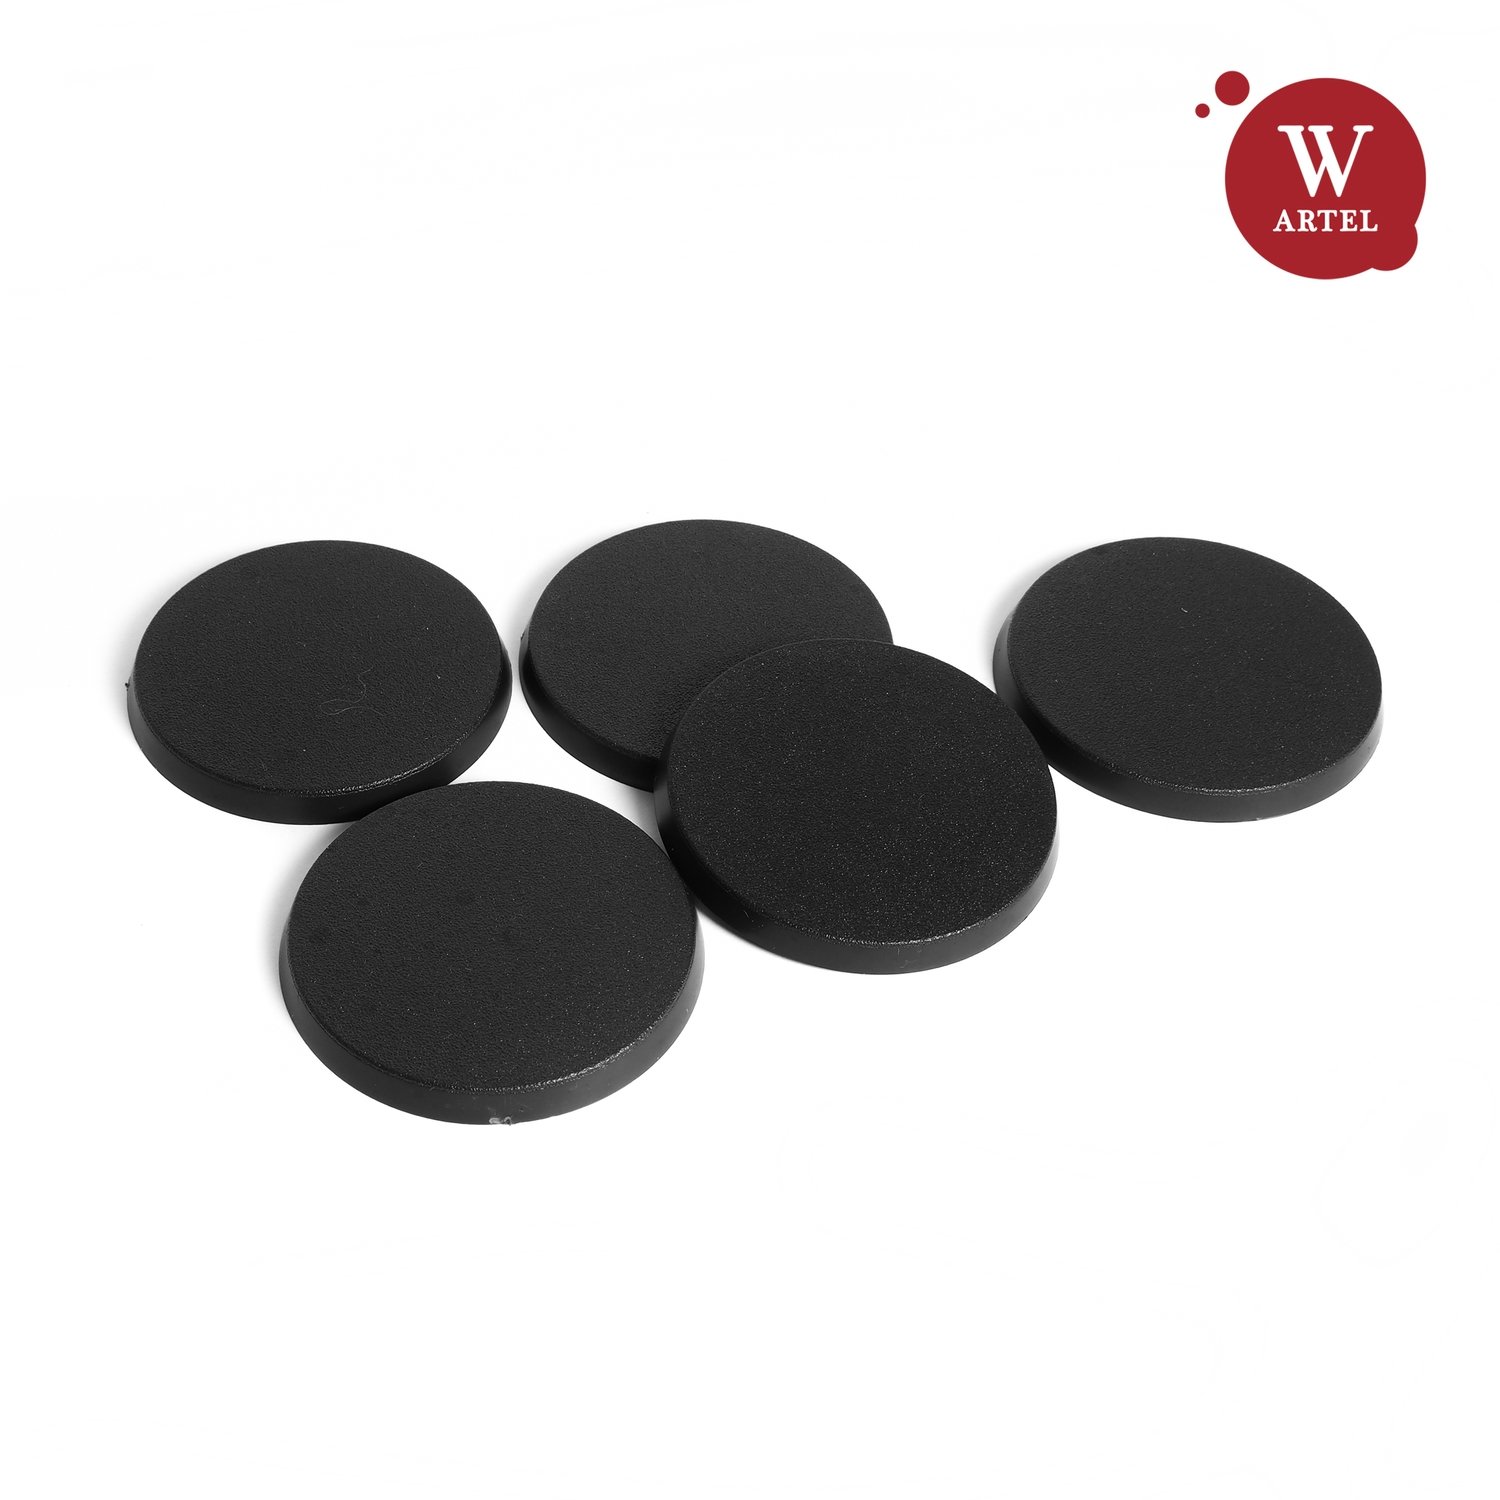 5x50mm round bases for miniatures